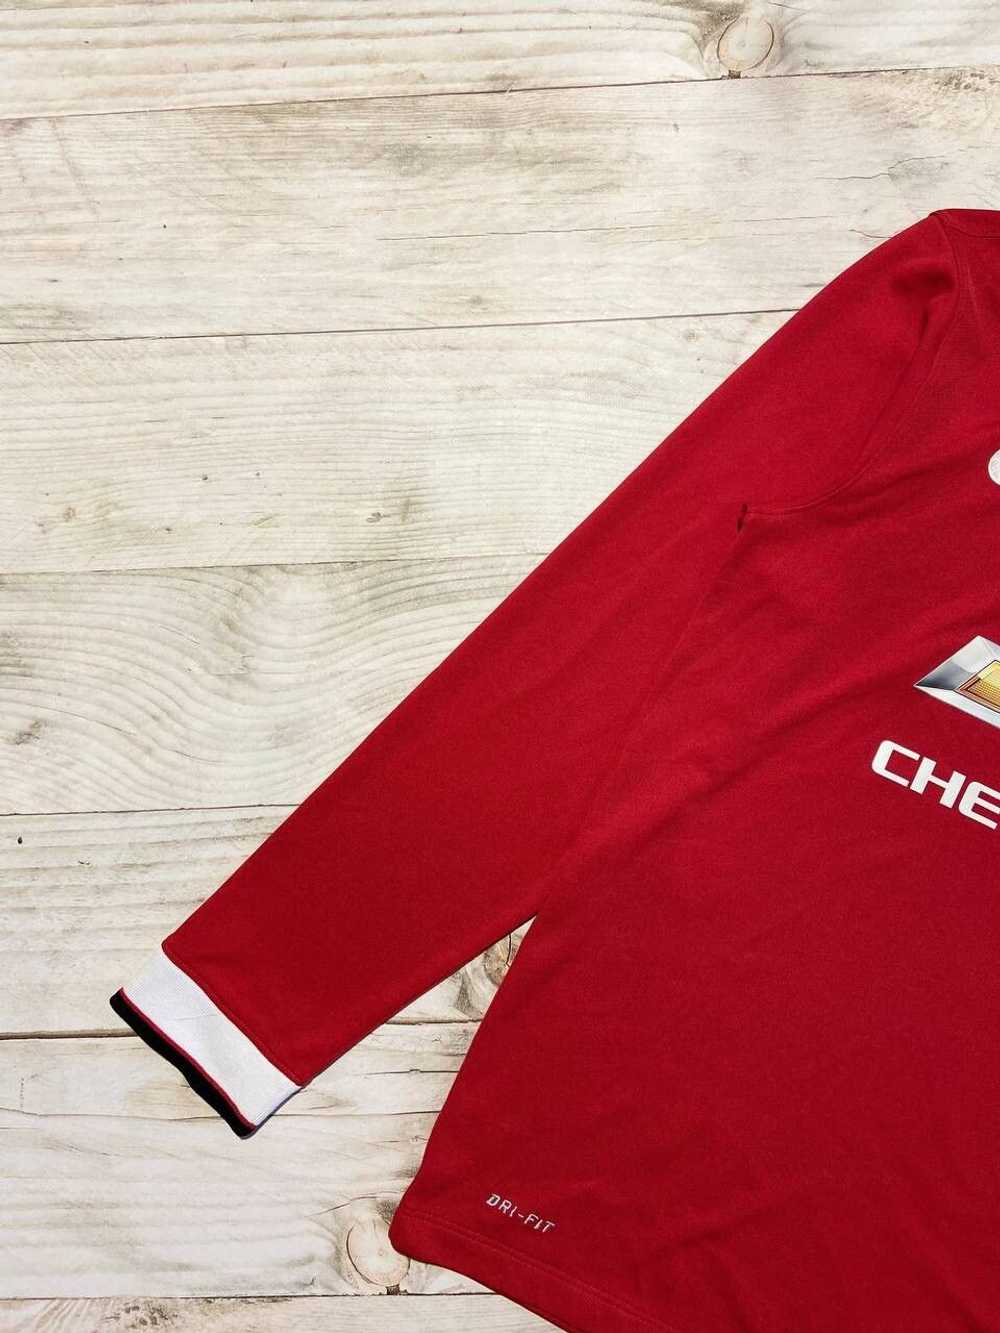 Manchester United × Nike × Soccer Jersey Manchest… - image 12